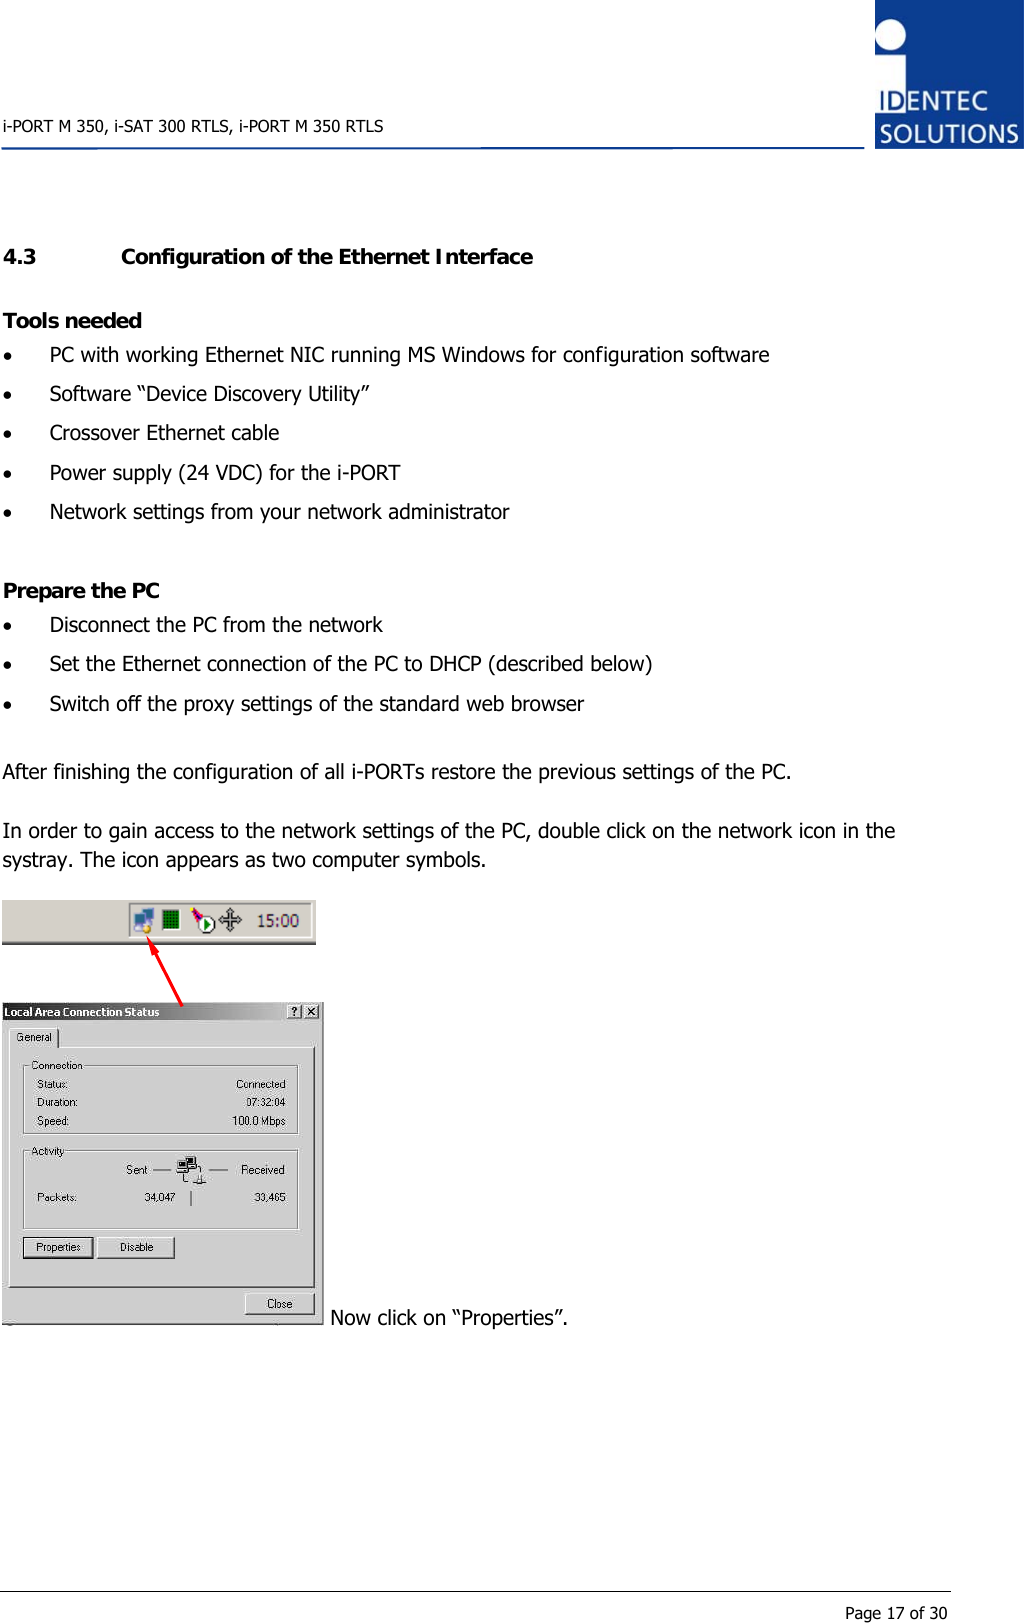    i-PORT M 350, i-SAT 300 RTLS, i-PORT M 350 RTLS      Page 17 of 30 4.3 Configuration of the Ethernet Interface Tools needed • PC with working Ethernet NIC running MS Windows for configuration software • Software “Device Discovery Utility” • Crossover Ethernet cable • Power supply (24 VDC) for the i-PORT • Network settings from your network administrator  Prepare the PC • Disconnect the PC from the network • Set the Ethernet connection of the PC to DHCP (described below) • Switch off the proxy settings of the standard web browser  After finishing the configuration of all i-PORTs restore the previous settings of the PC.  In order to gain access to the network settings of the PC, double click on the network icon in the systray. The icon appears as two computer symbols.      Now click on “Properties”.  